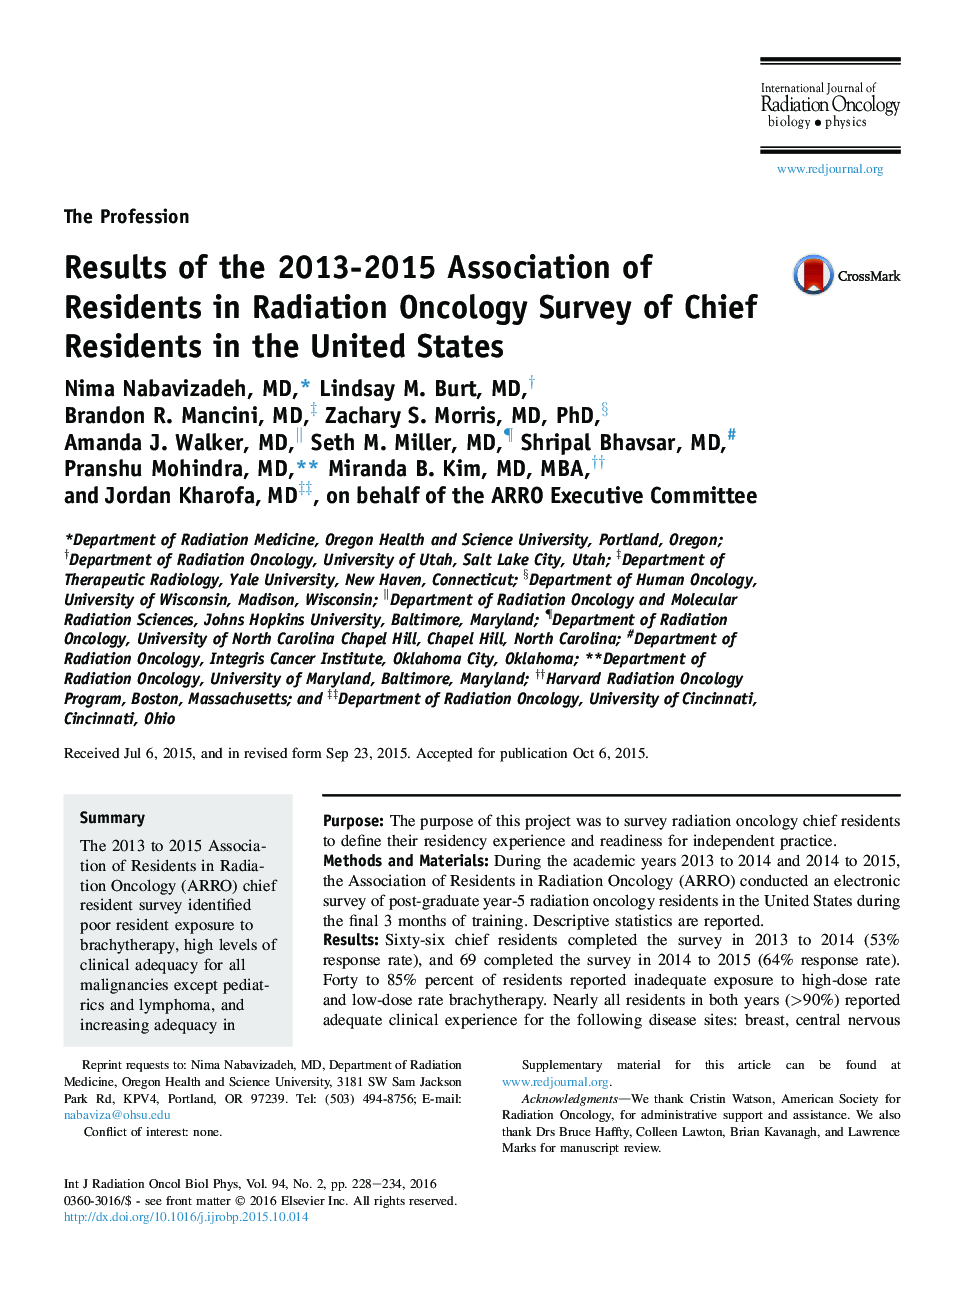 Results of the 2013-2015 Association of Residents in Radiation Oncology Survey of Chief Residents in the United States